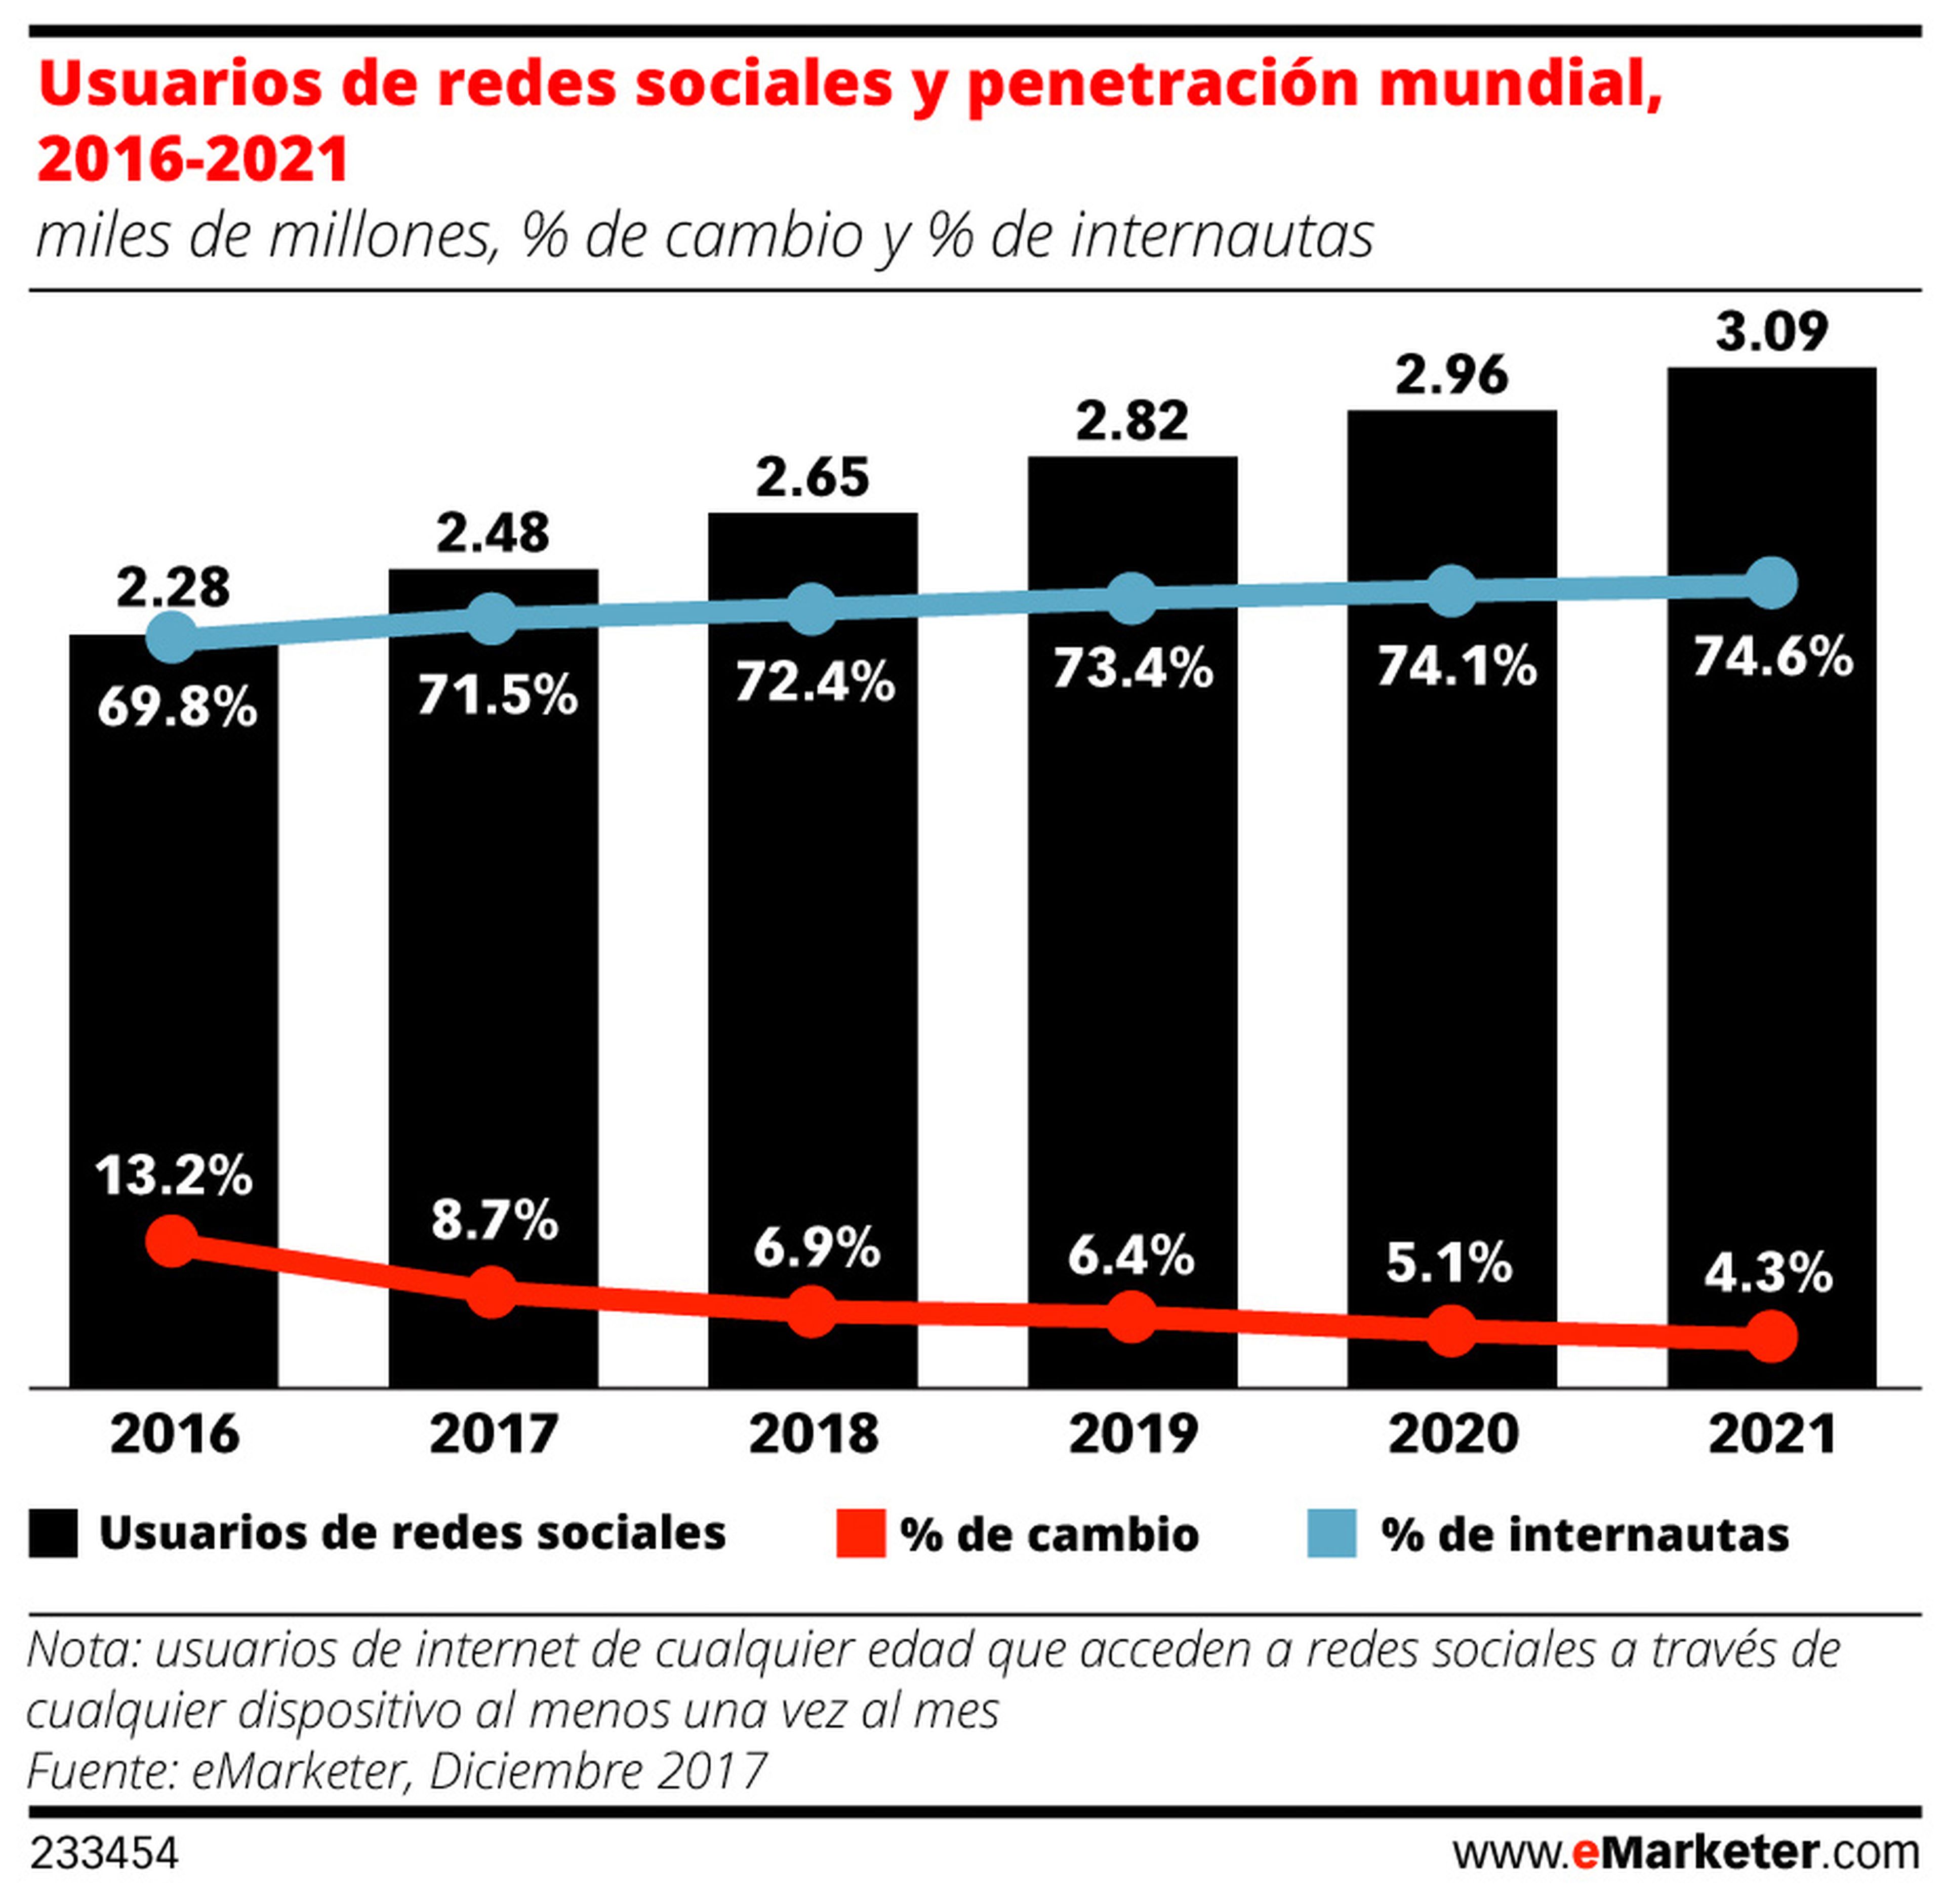 Total usuarios redes sociales eMarketer